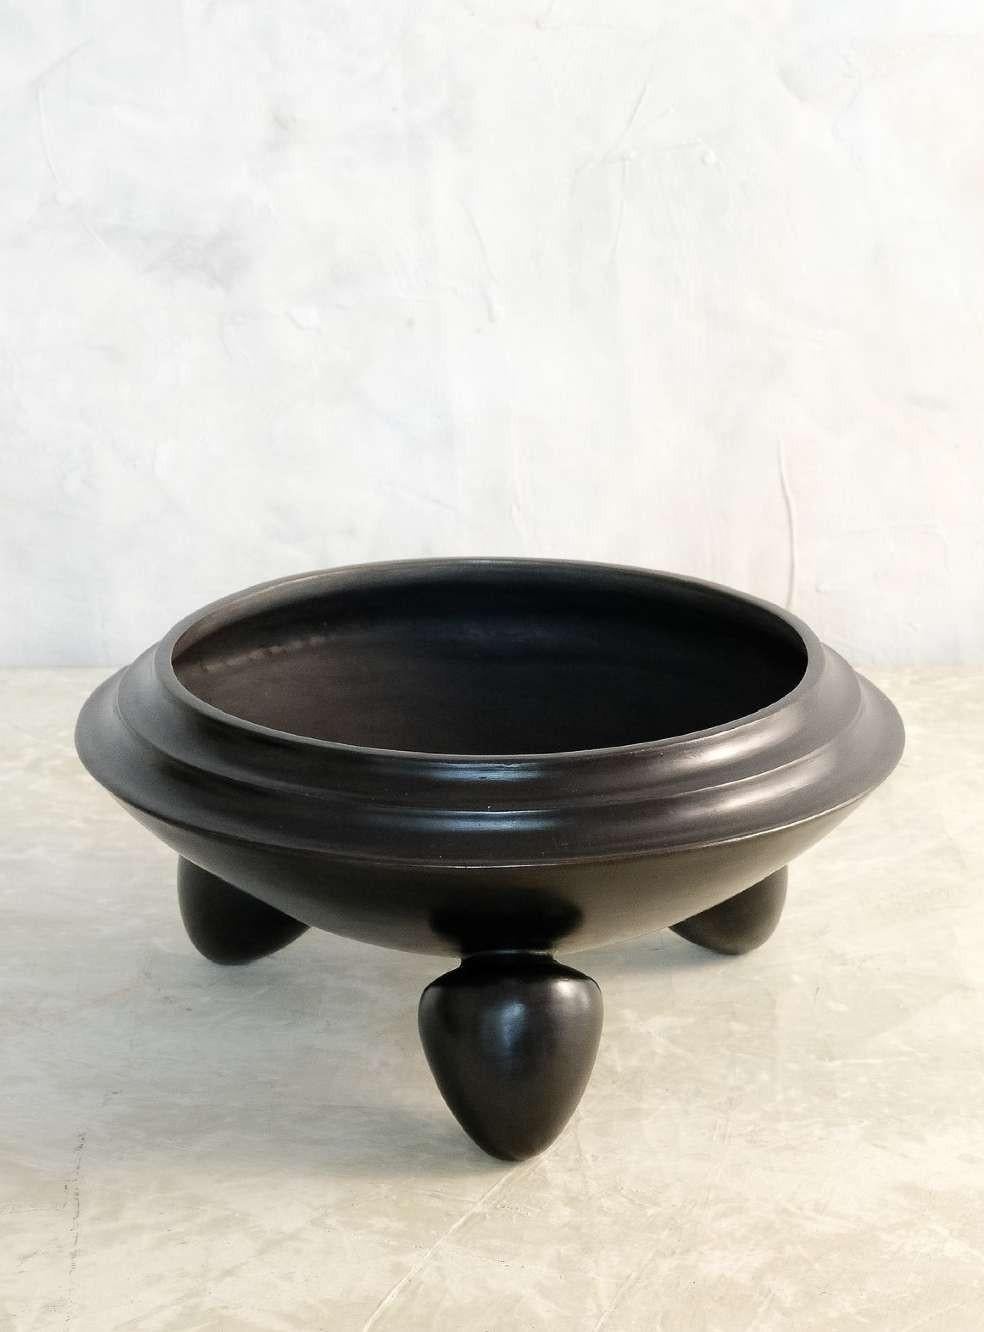 Contemporary Apaxtle Bowl by Onora